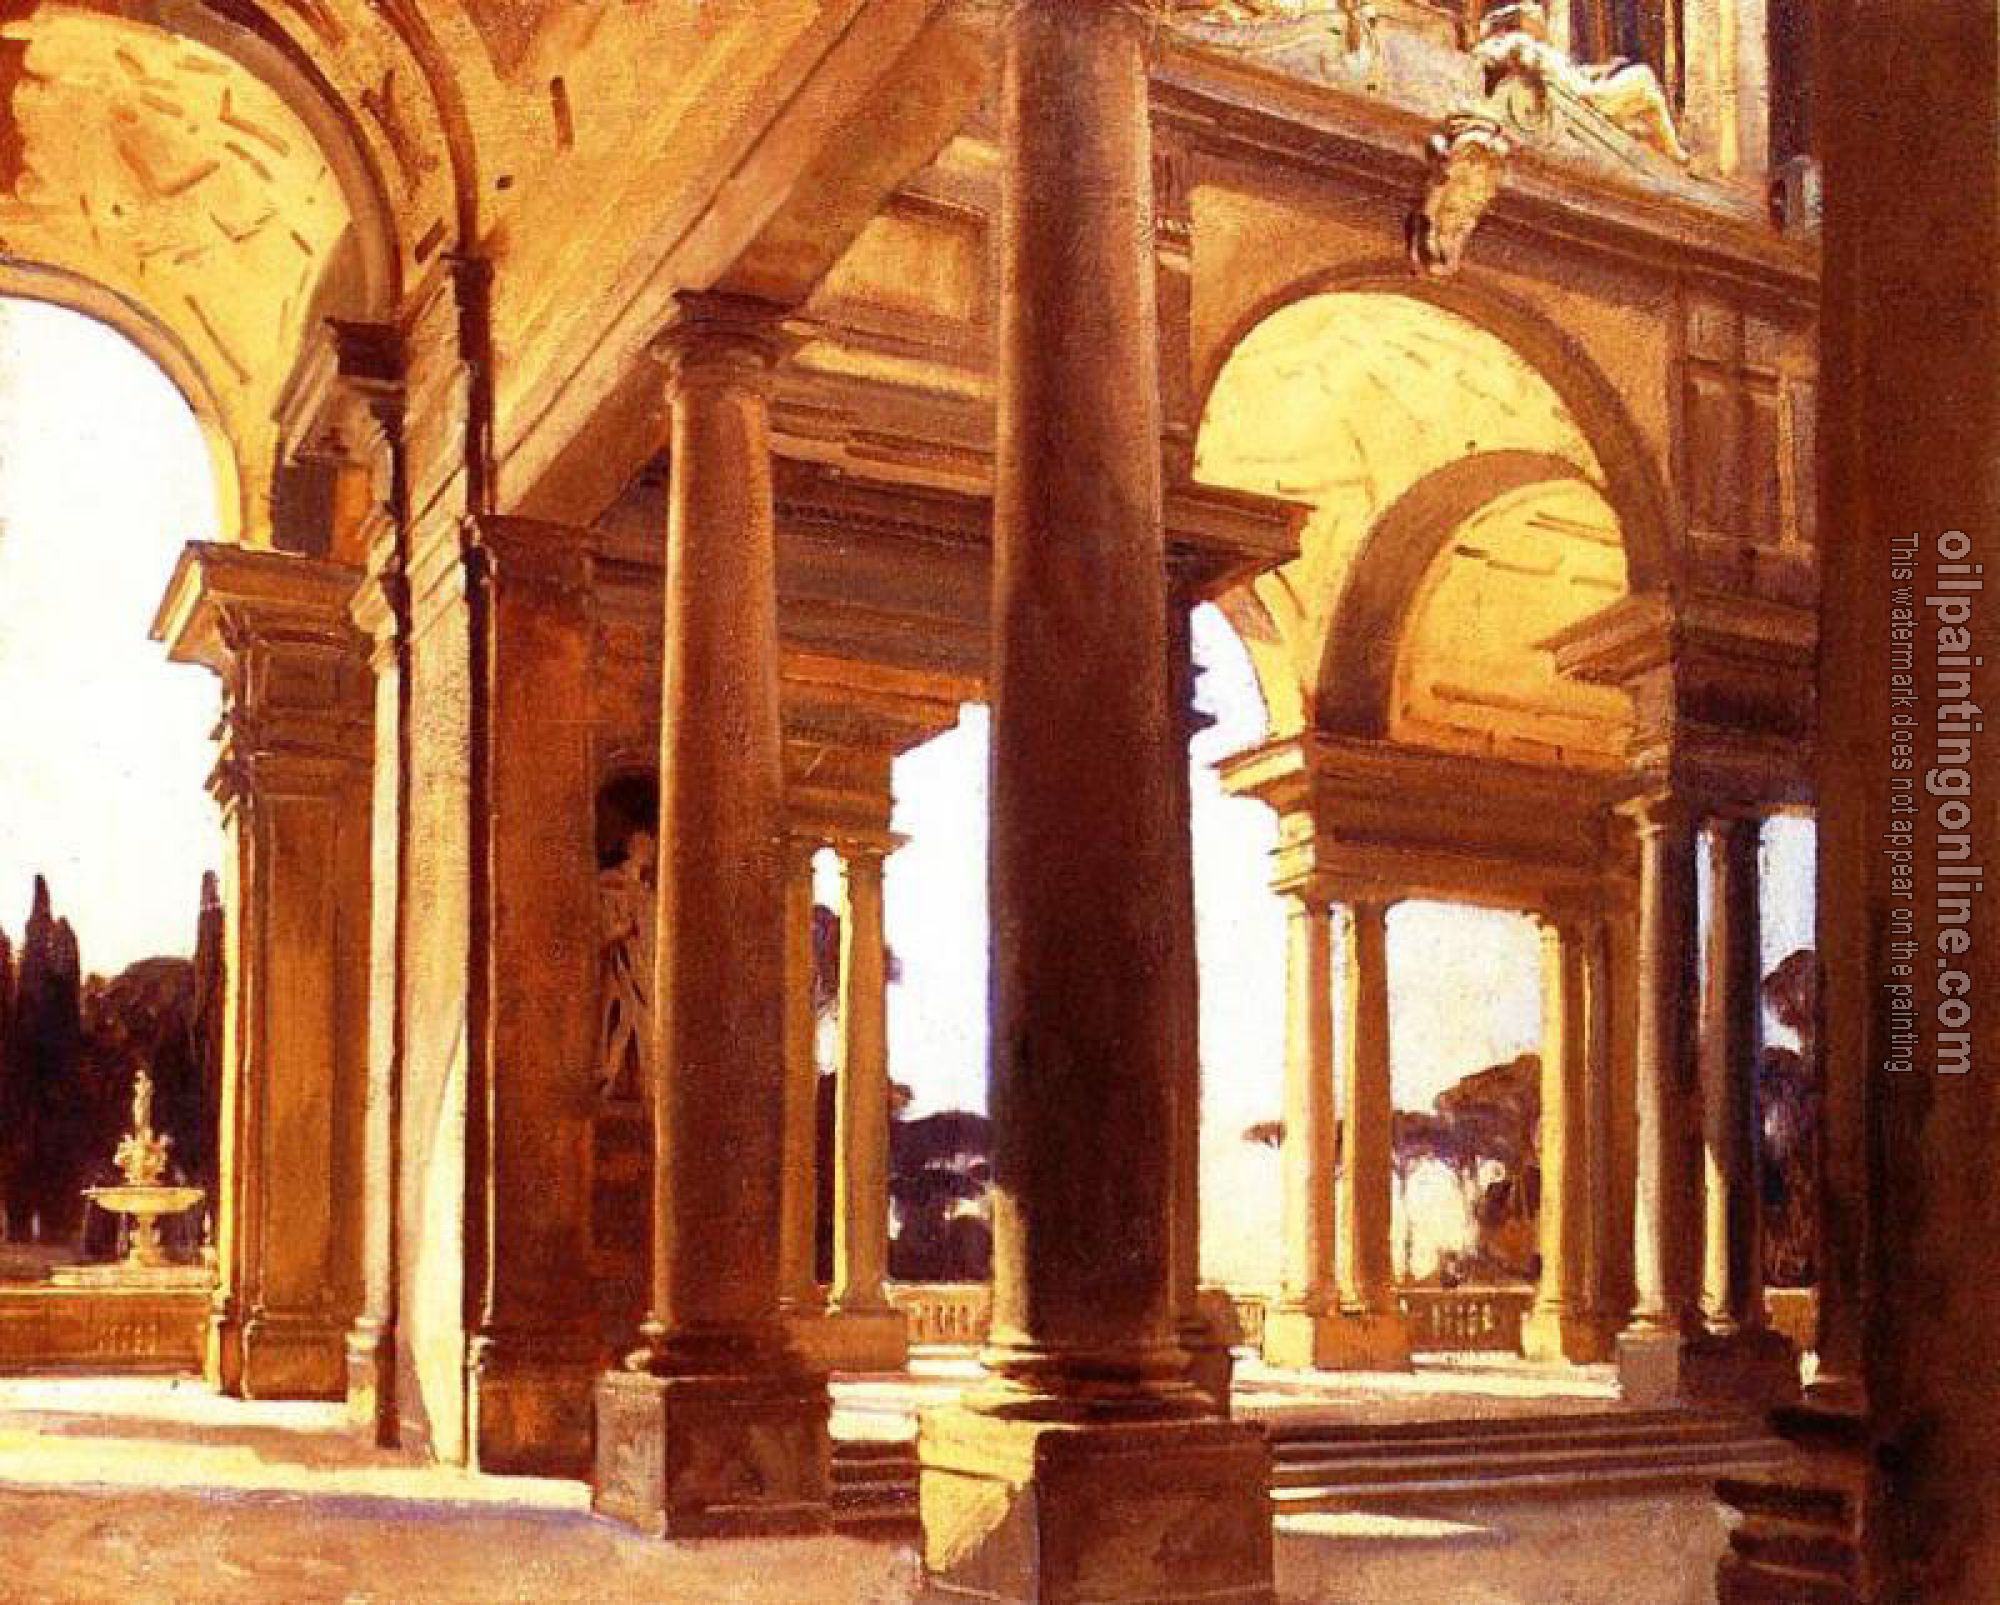 Sargent, John Singer - A Study of Architecture, Florence